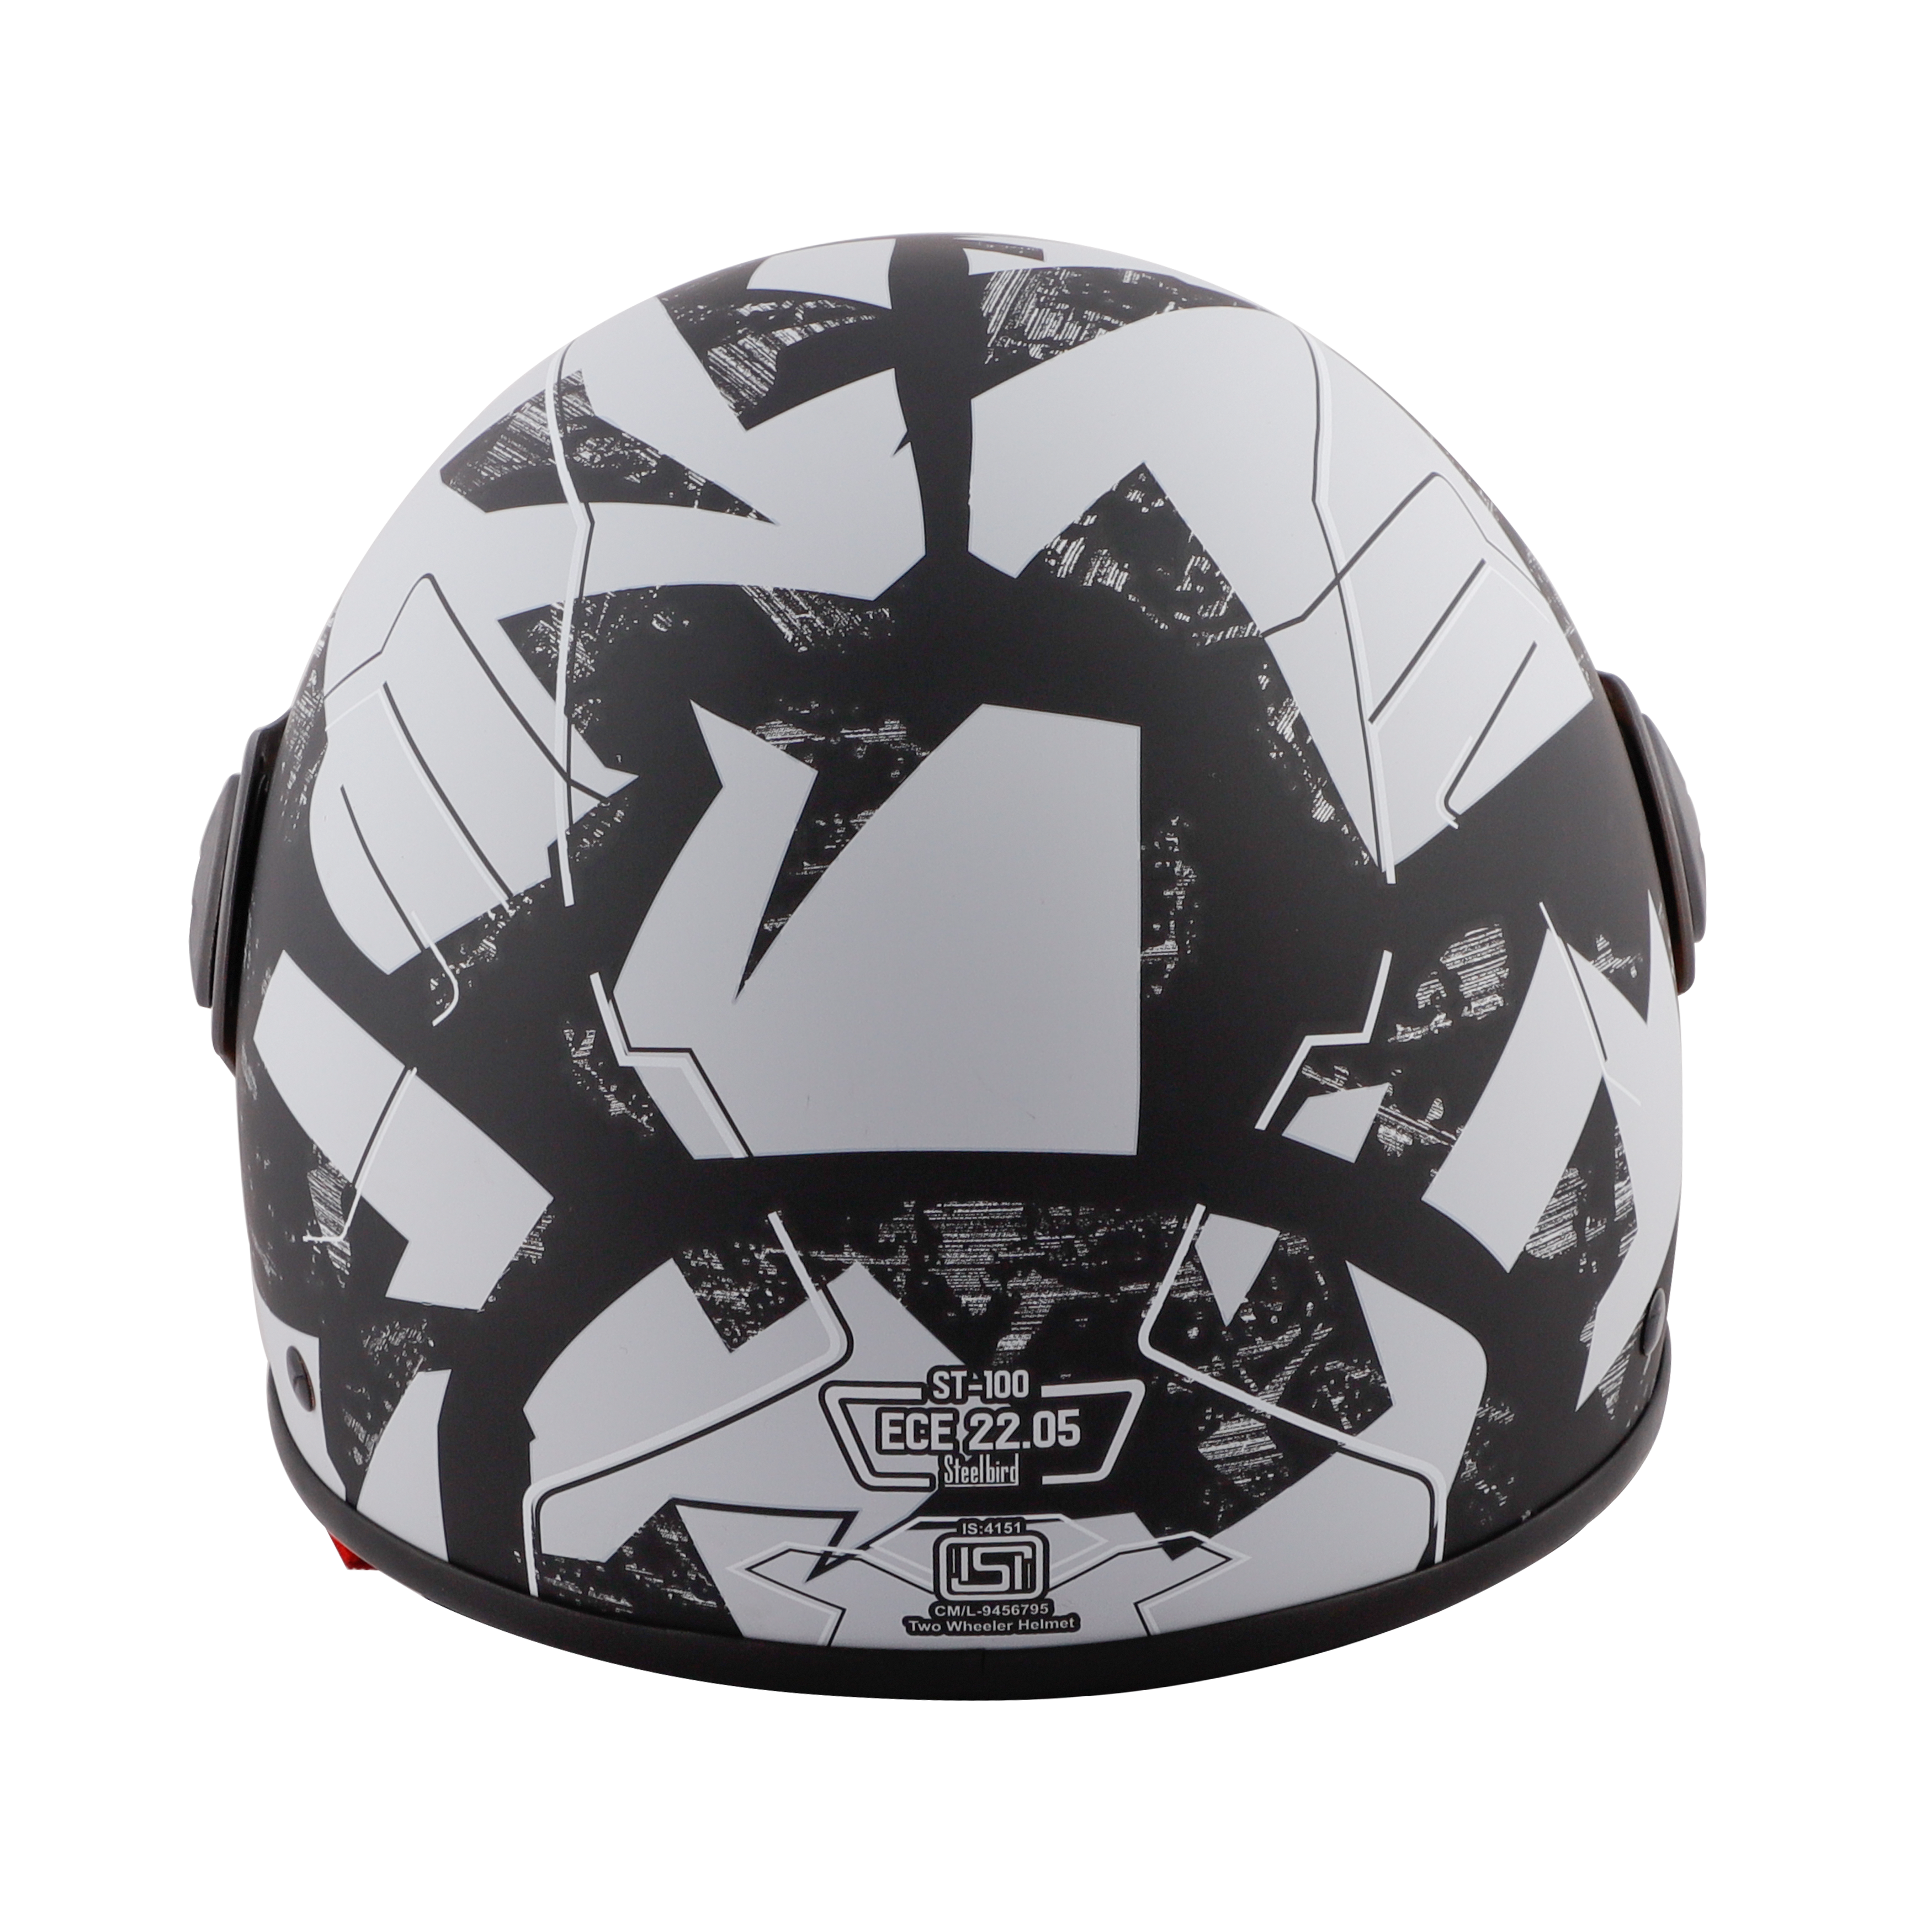 ST-100 CAMO ECE MAT BLACK WITH SILVER (FITTED WITH CLEAR VISOR. SMOKE VISOR ONLY FOR ILLUSTRATION PURPOSE)